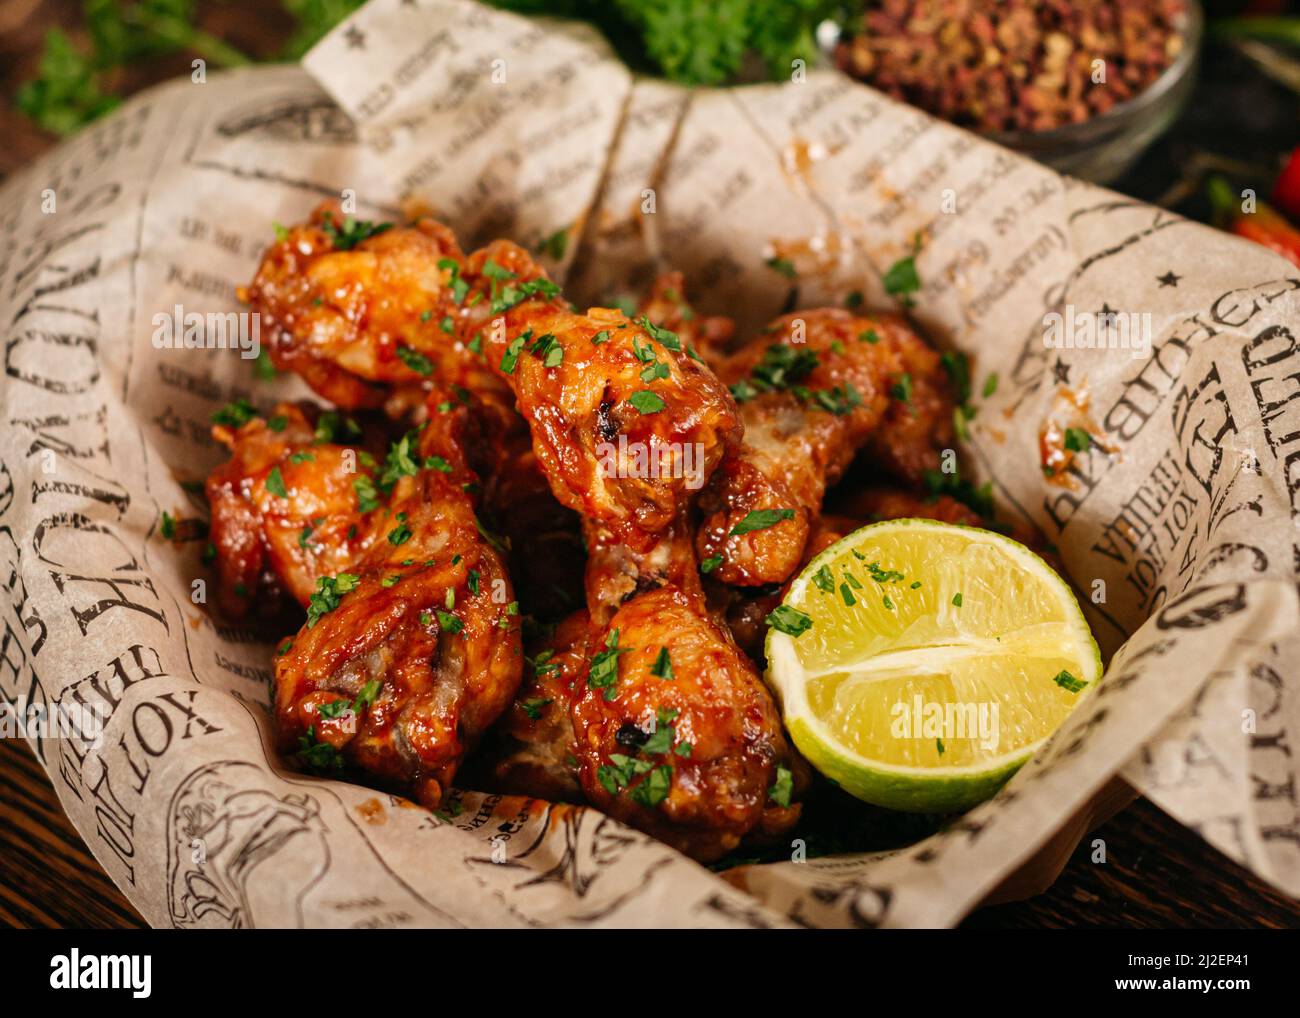 Portion of chicken drumsticks deep fried and in covered in (seasoned with) hot sauce. Served with a half of lime on craft paper. Stock Photo